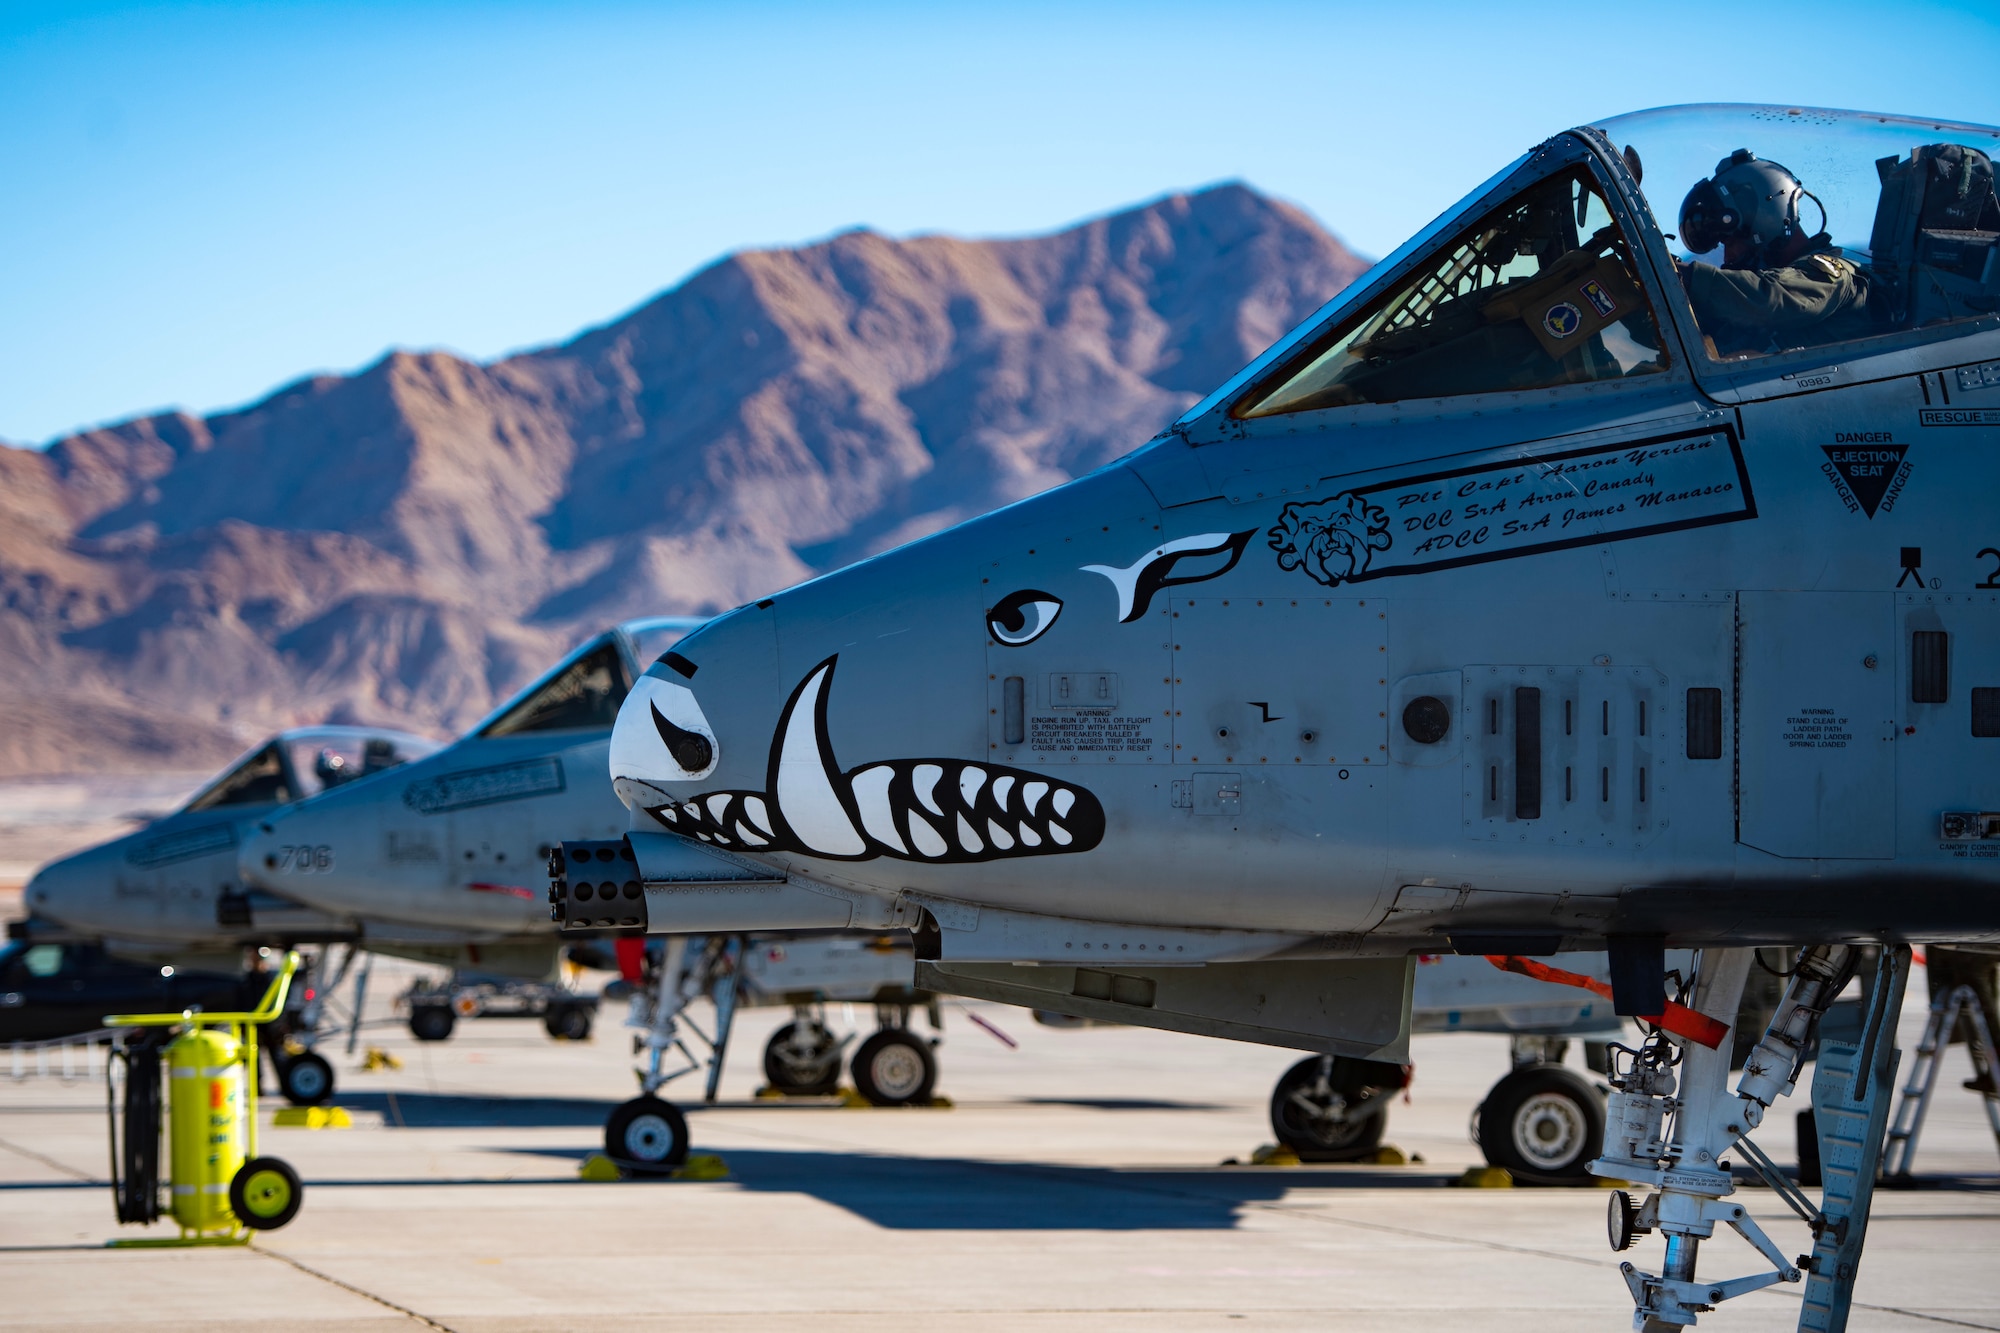 A trio of A-10C Thunderbolt II aircraft go through final checks as they prepare for a Red Flag-Nellis 23-1 exercise on Nellis Air Force Base, Nevada, Jan. 25, 2023. The A-10C are simple, effective and survivable twin-engine jet aircrafts that can be used against light maritime attack aircraft and all ground targets, including tanks and other armored vehicles.

(U.S. Air Force photo by Senior Airman Jon P. Anderson)